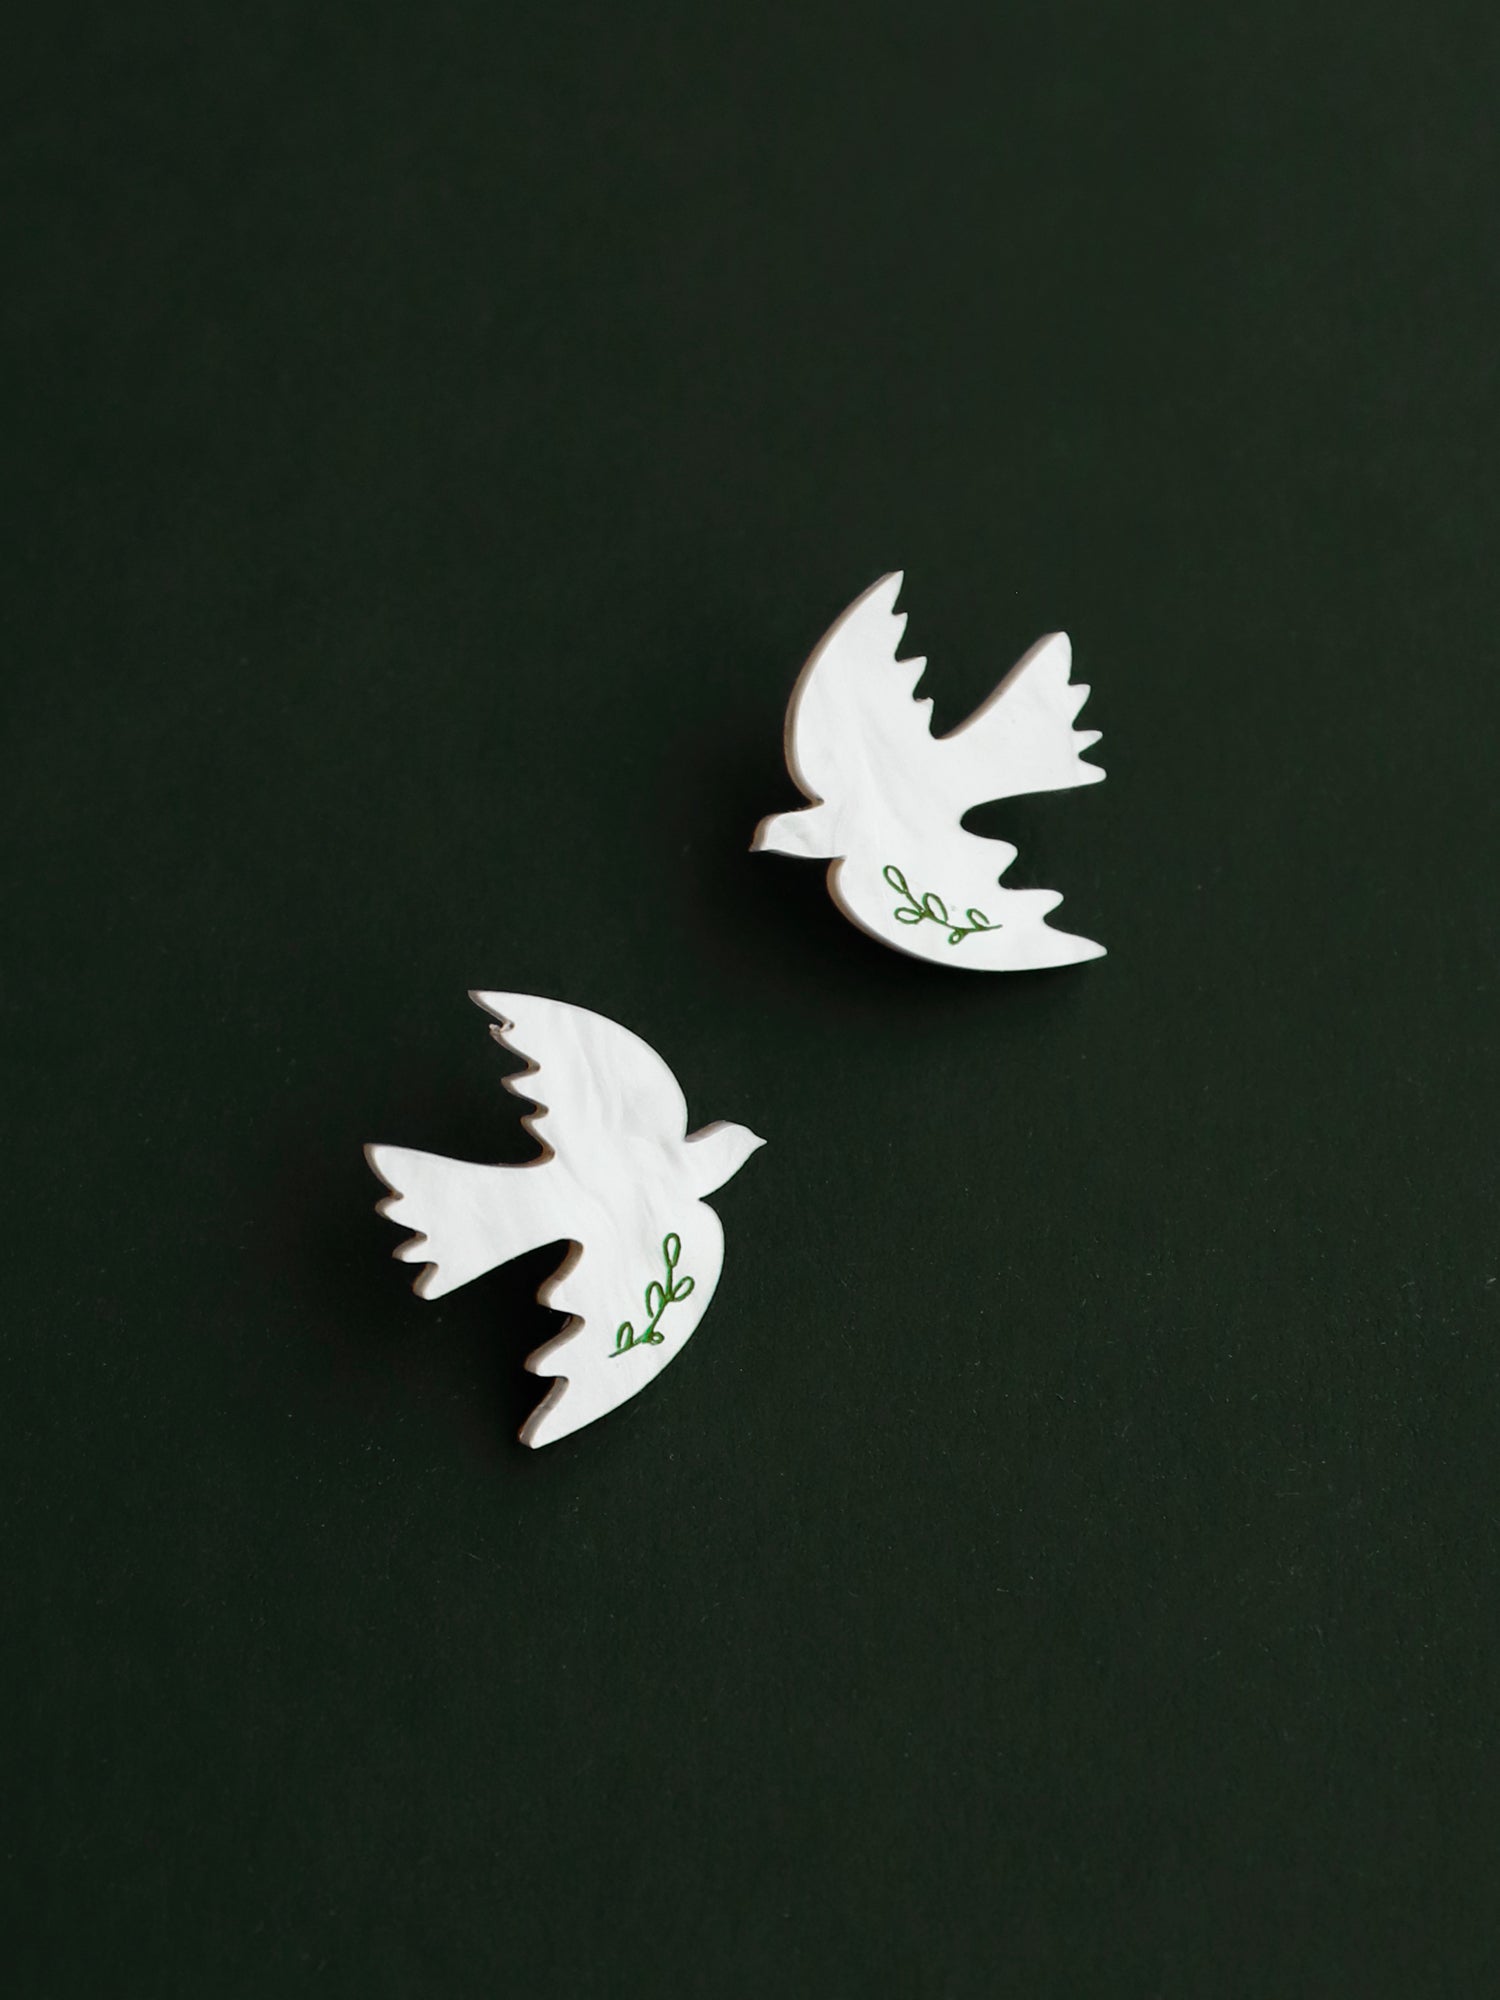 Dove Studs - Medical Aid for Palestinians Fundraiser